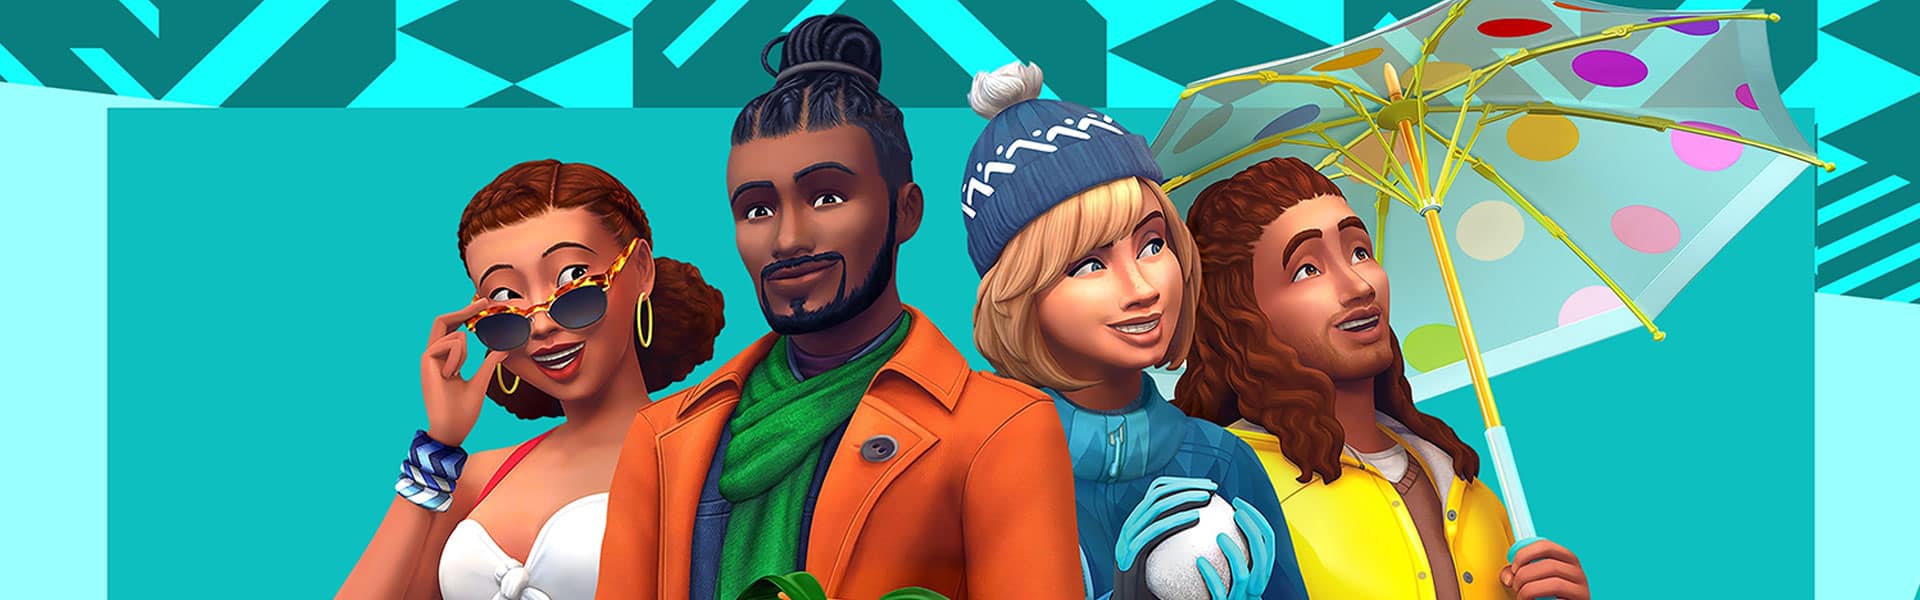 Valliver Games - Games e Cheats para Games: Cheats The Sims 4  aspirations.complete_current_milestone